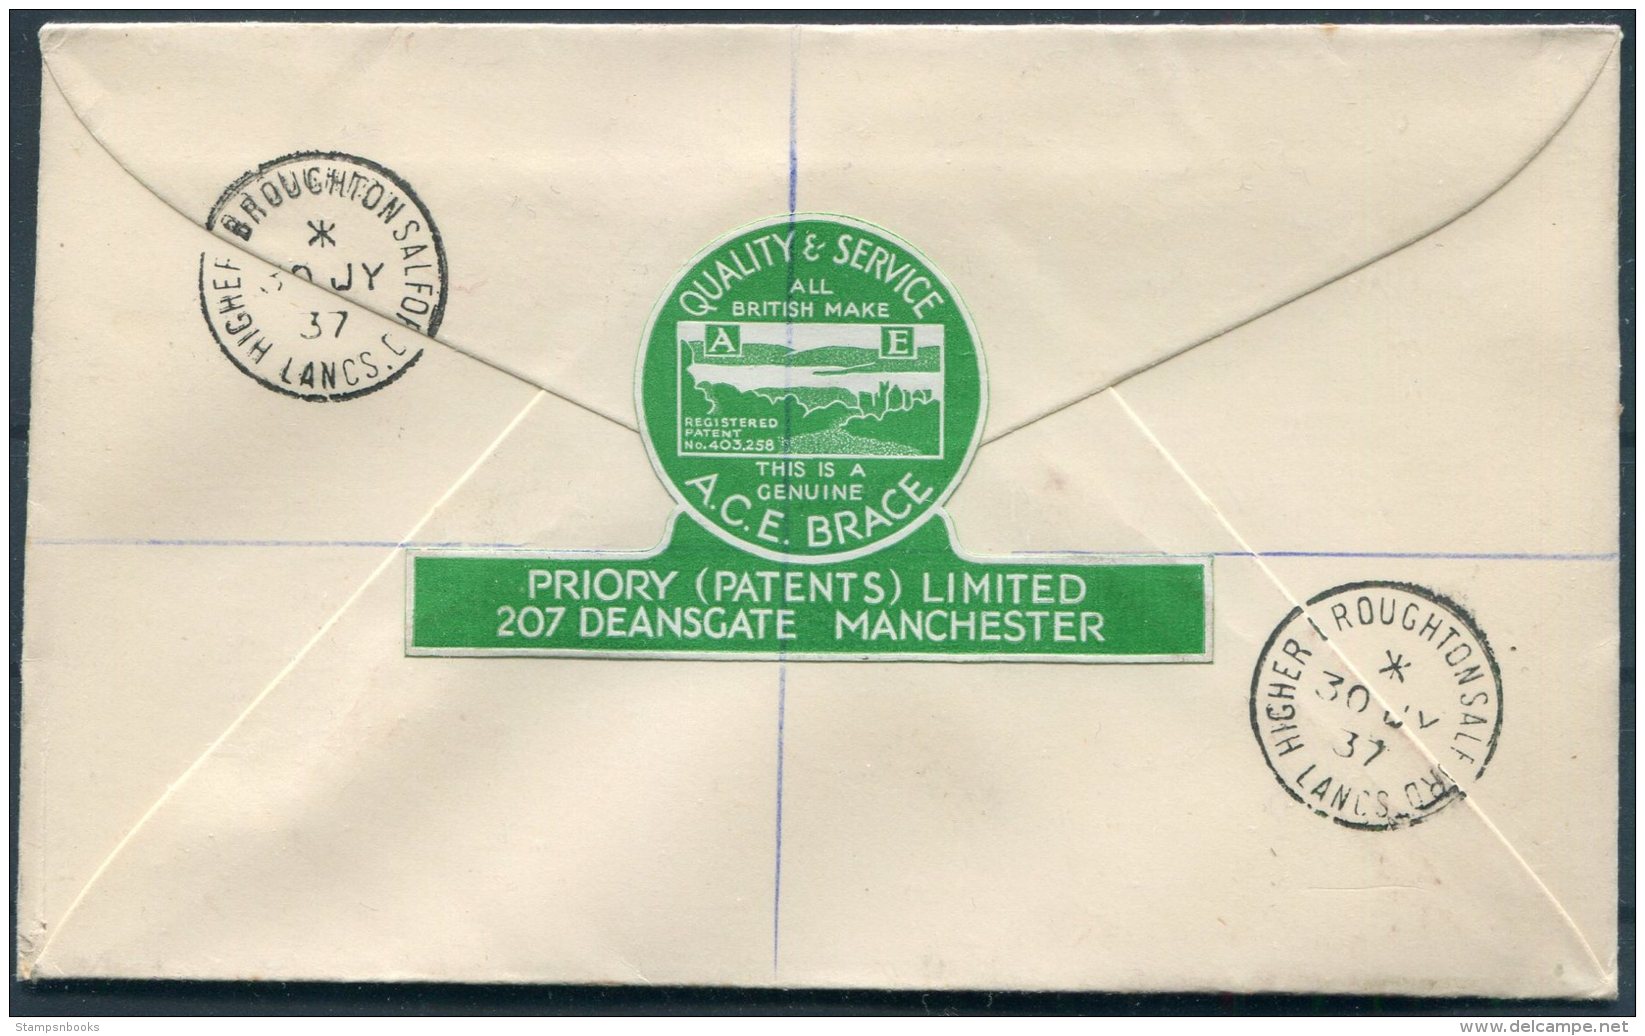 1937 GB Salford Lancashire Registered Cover. Higher Broughton Cds. A.C.E. Brace, Deansgate Manchester Vignette - Covers & Documents